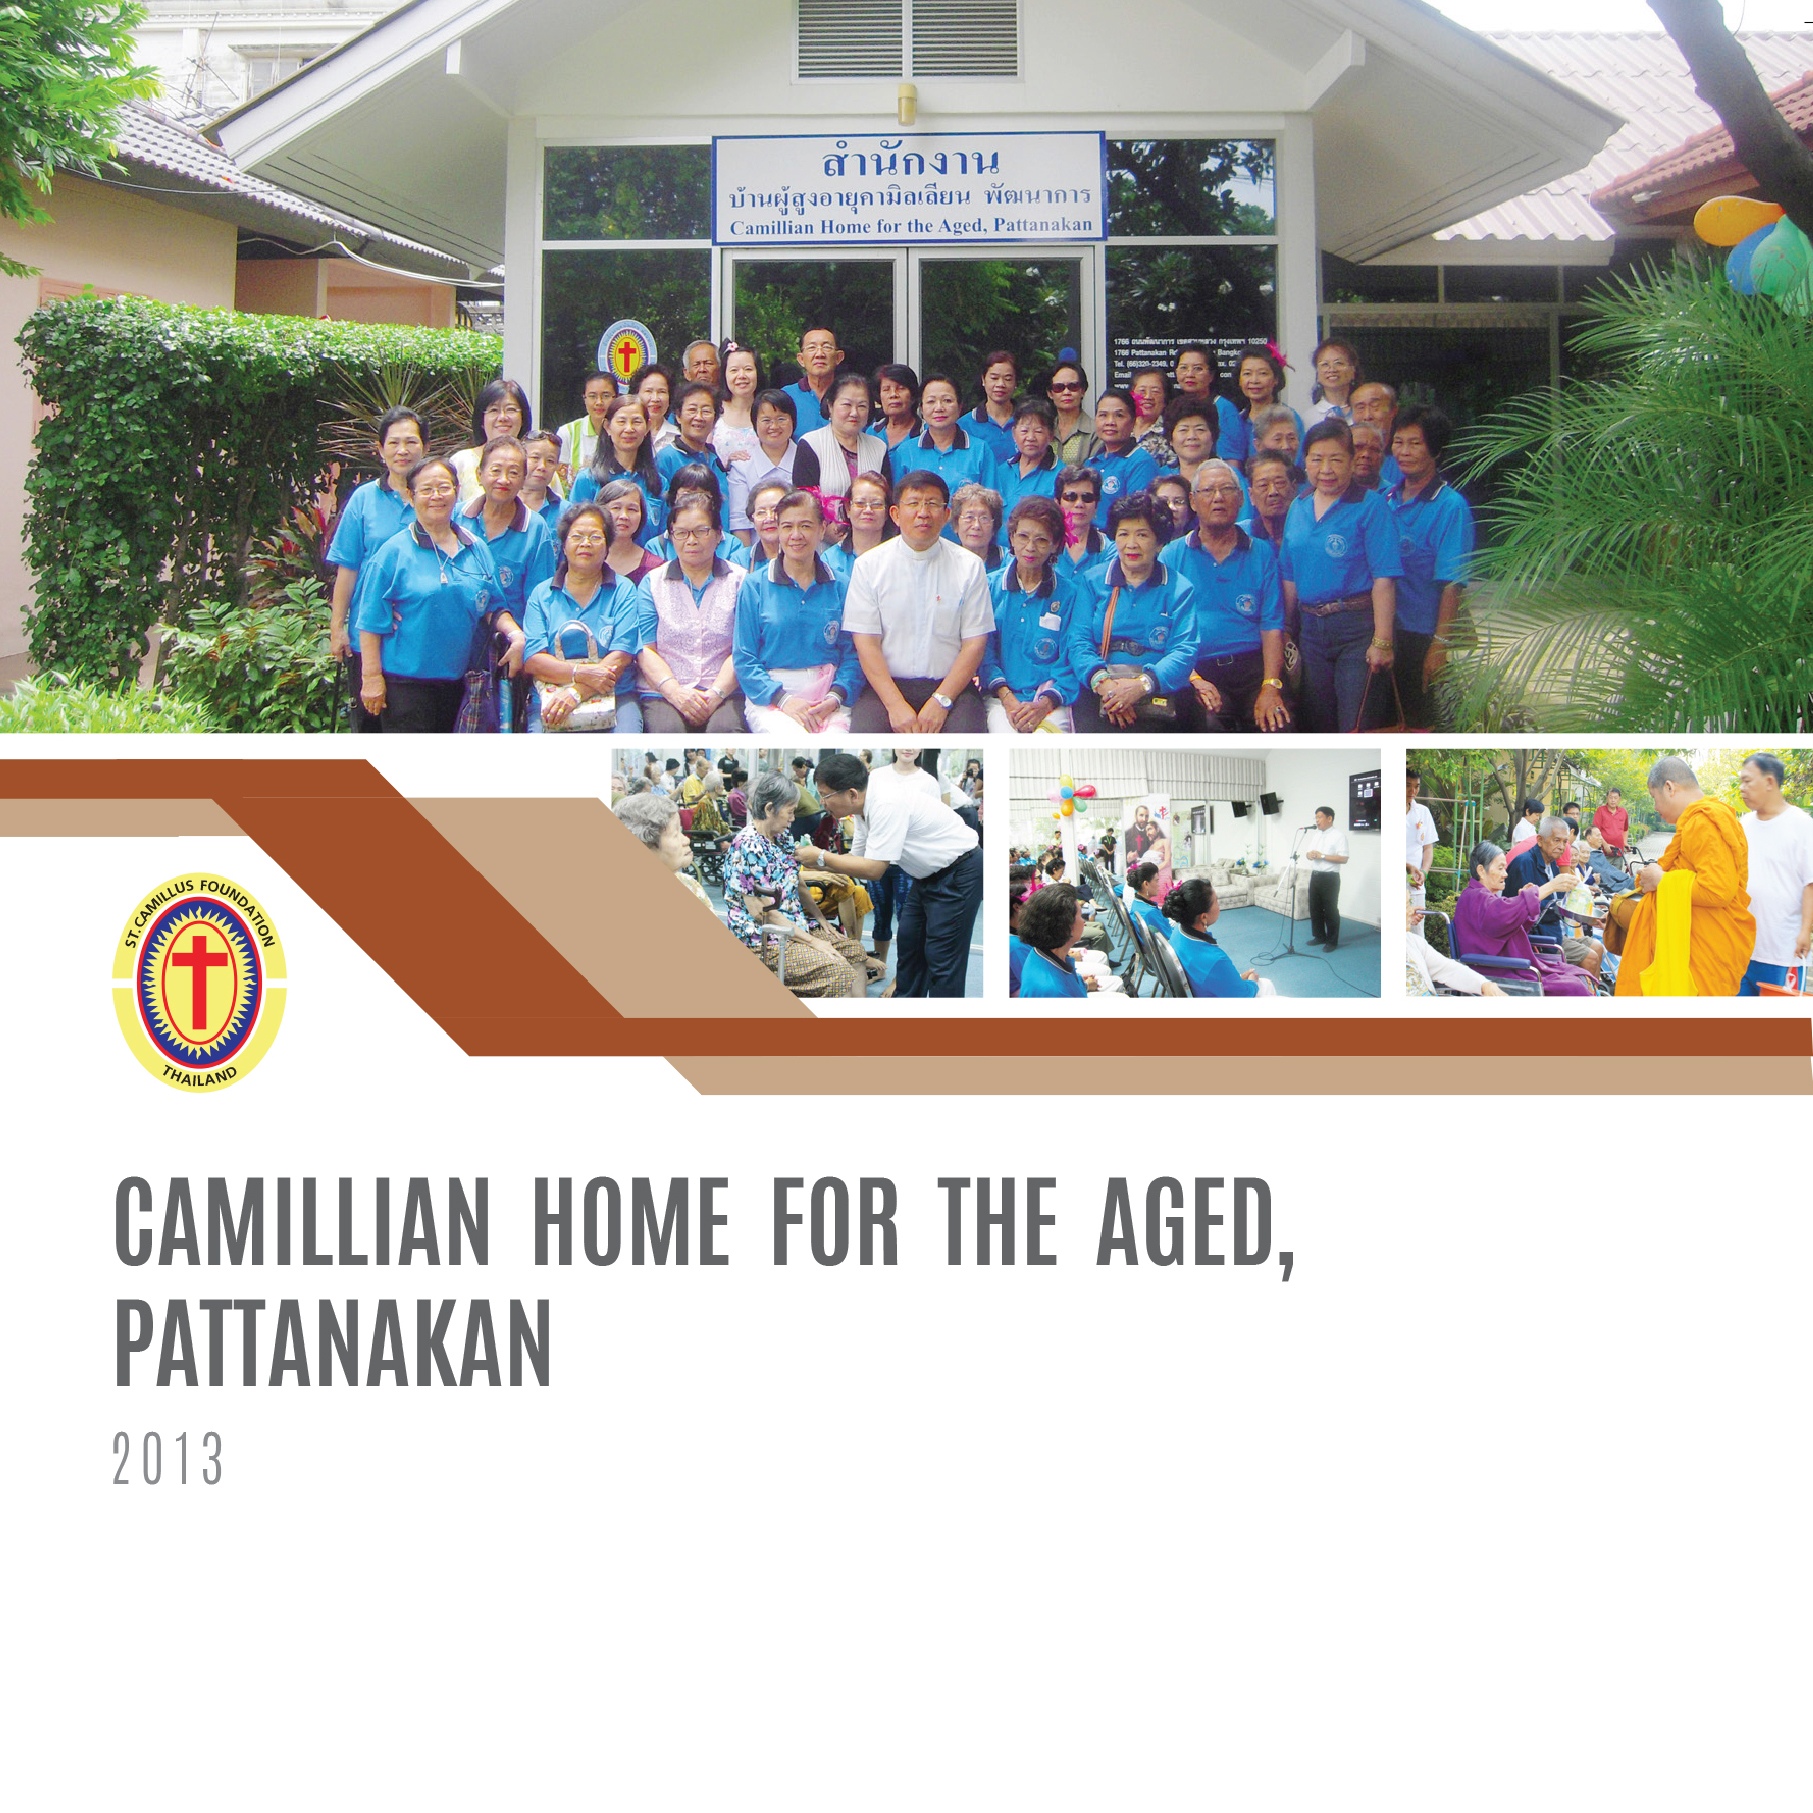 Camillian Home for the Aged Pattanakan